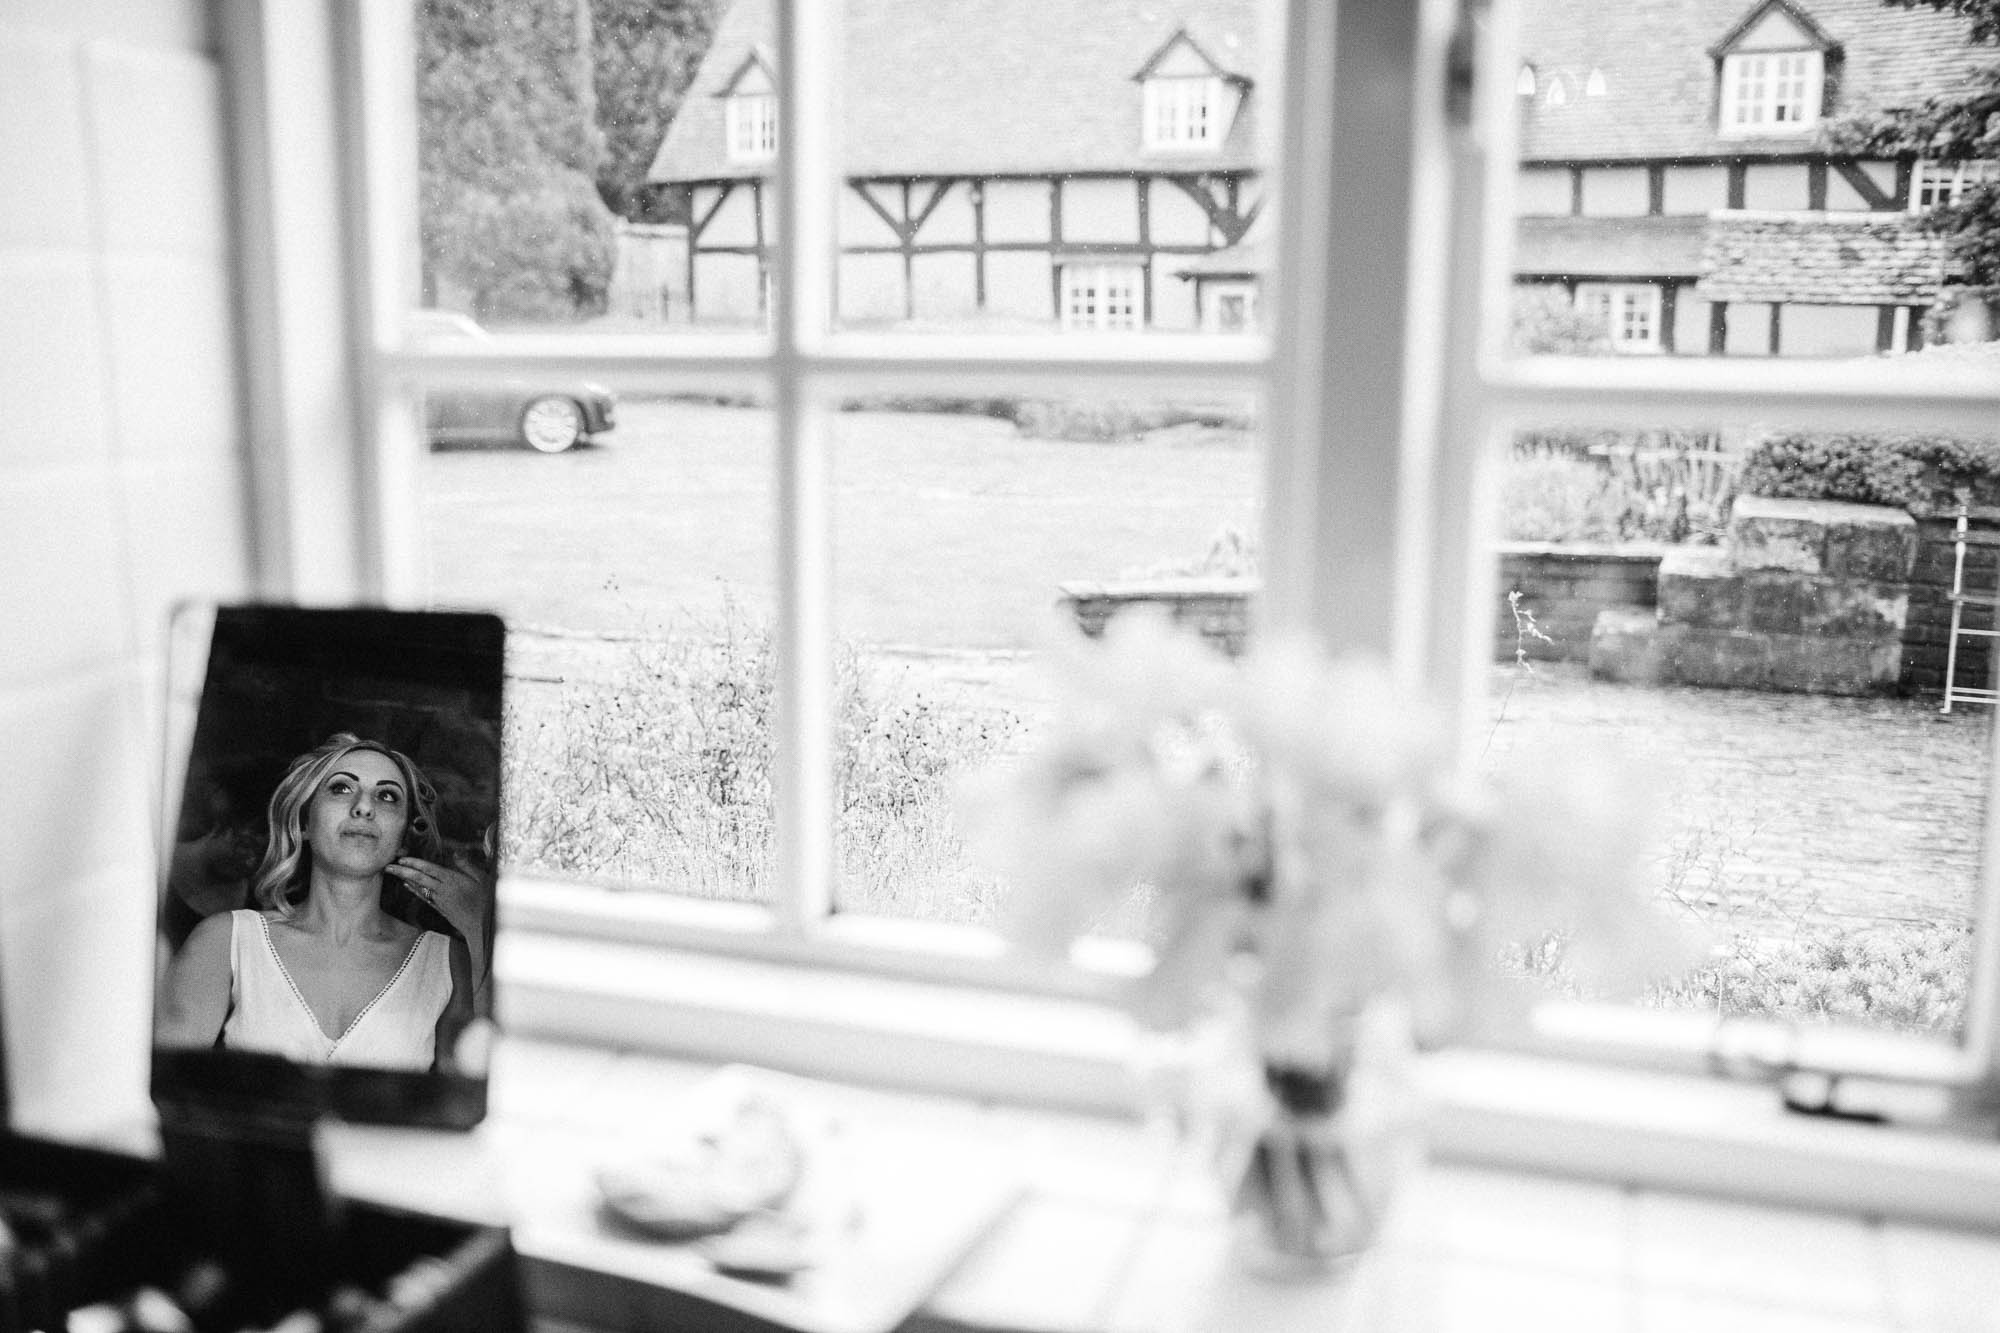 Reflection of bride getting make up done in black and white with The Granary at Dovehouse Farm in the background